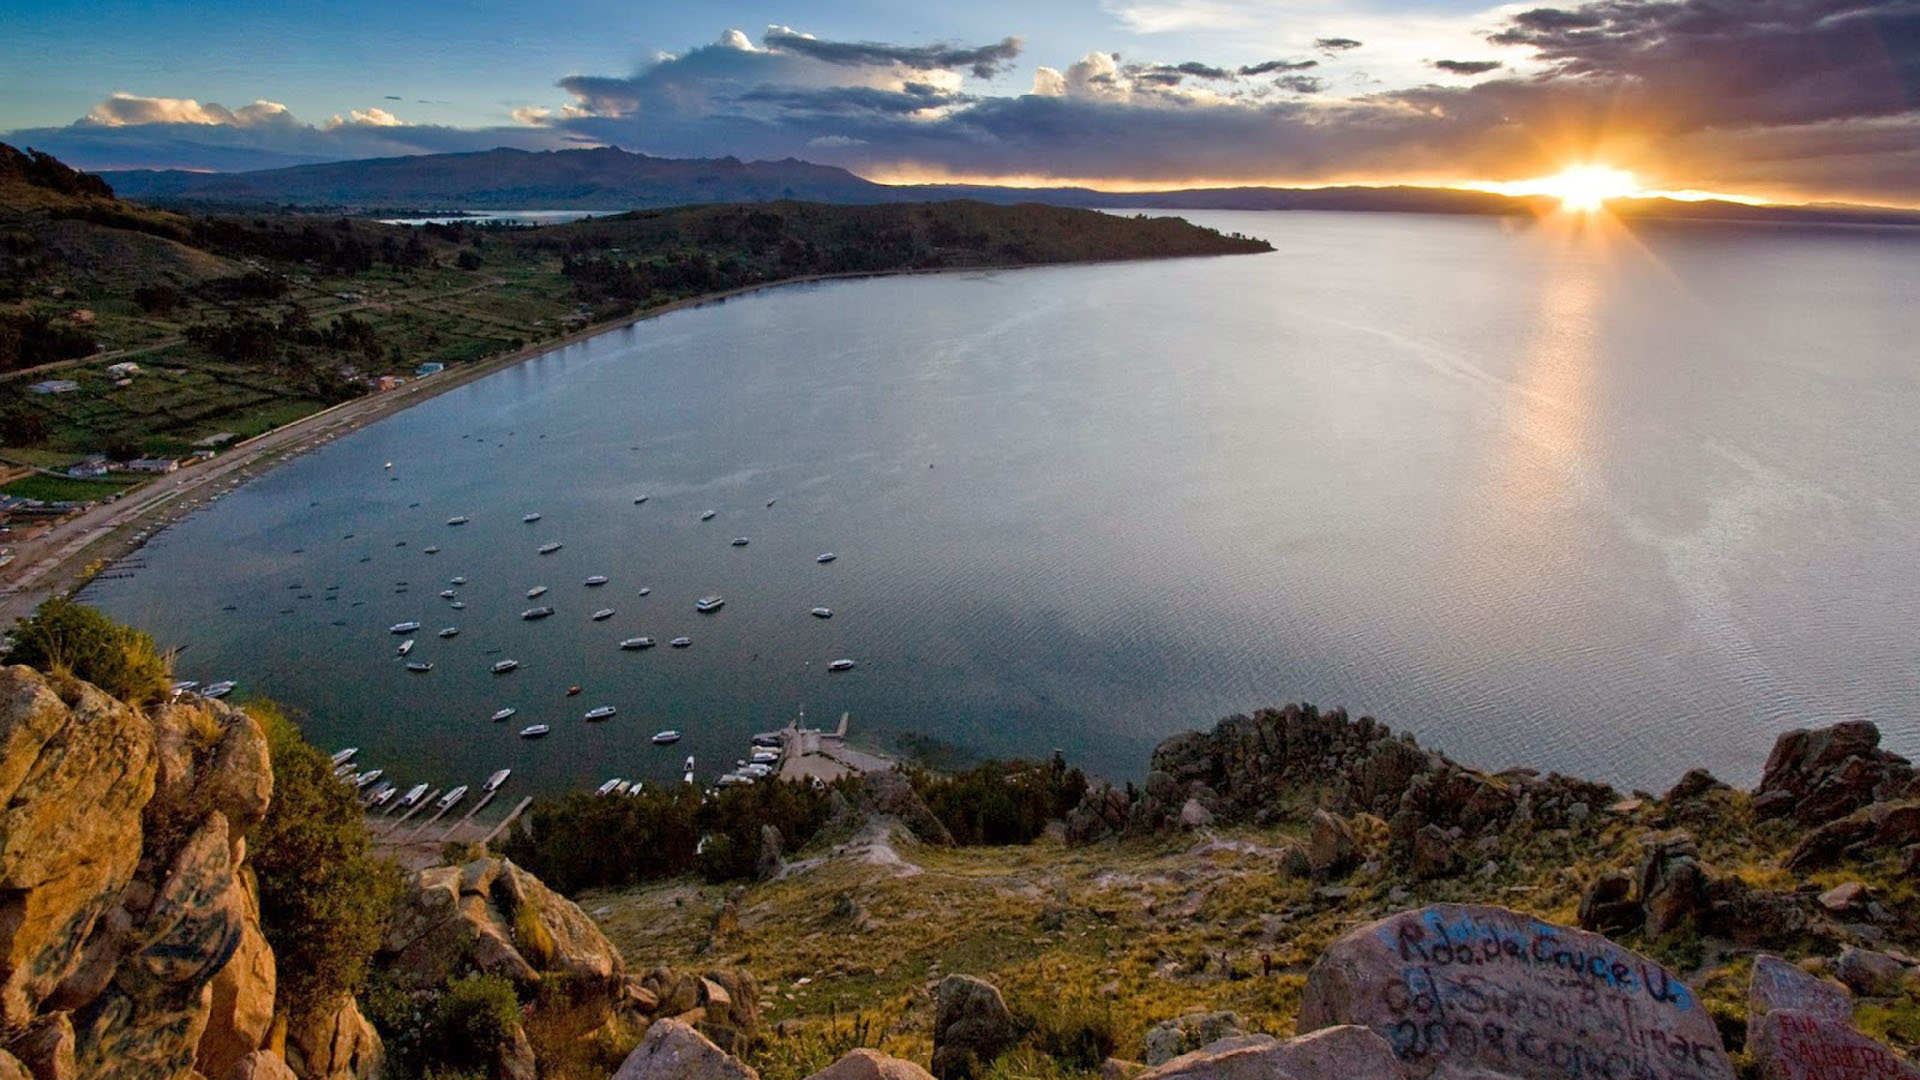 Lake Titicaca, Searching for the missing turist, Lago Titicaca, Infobae news, 1920x1080 Full HD Desktop